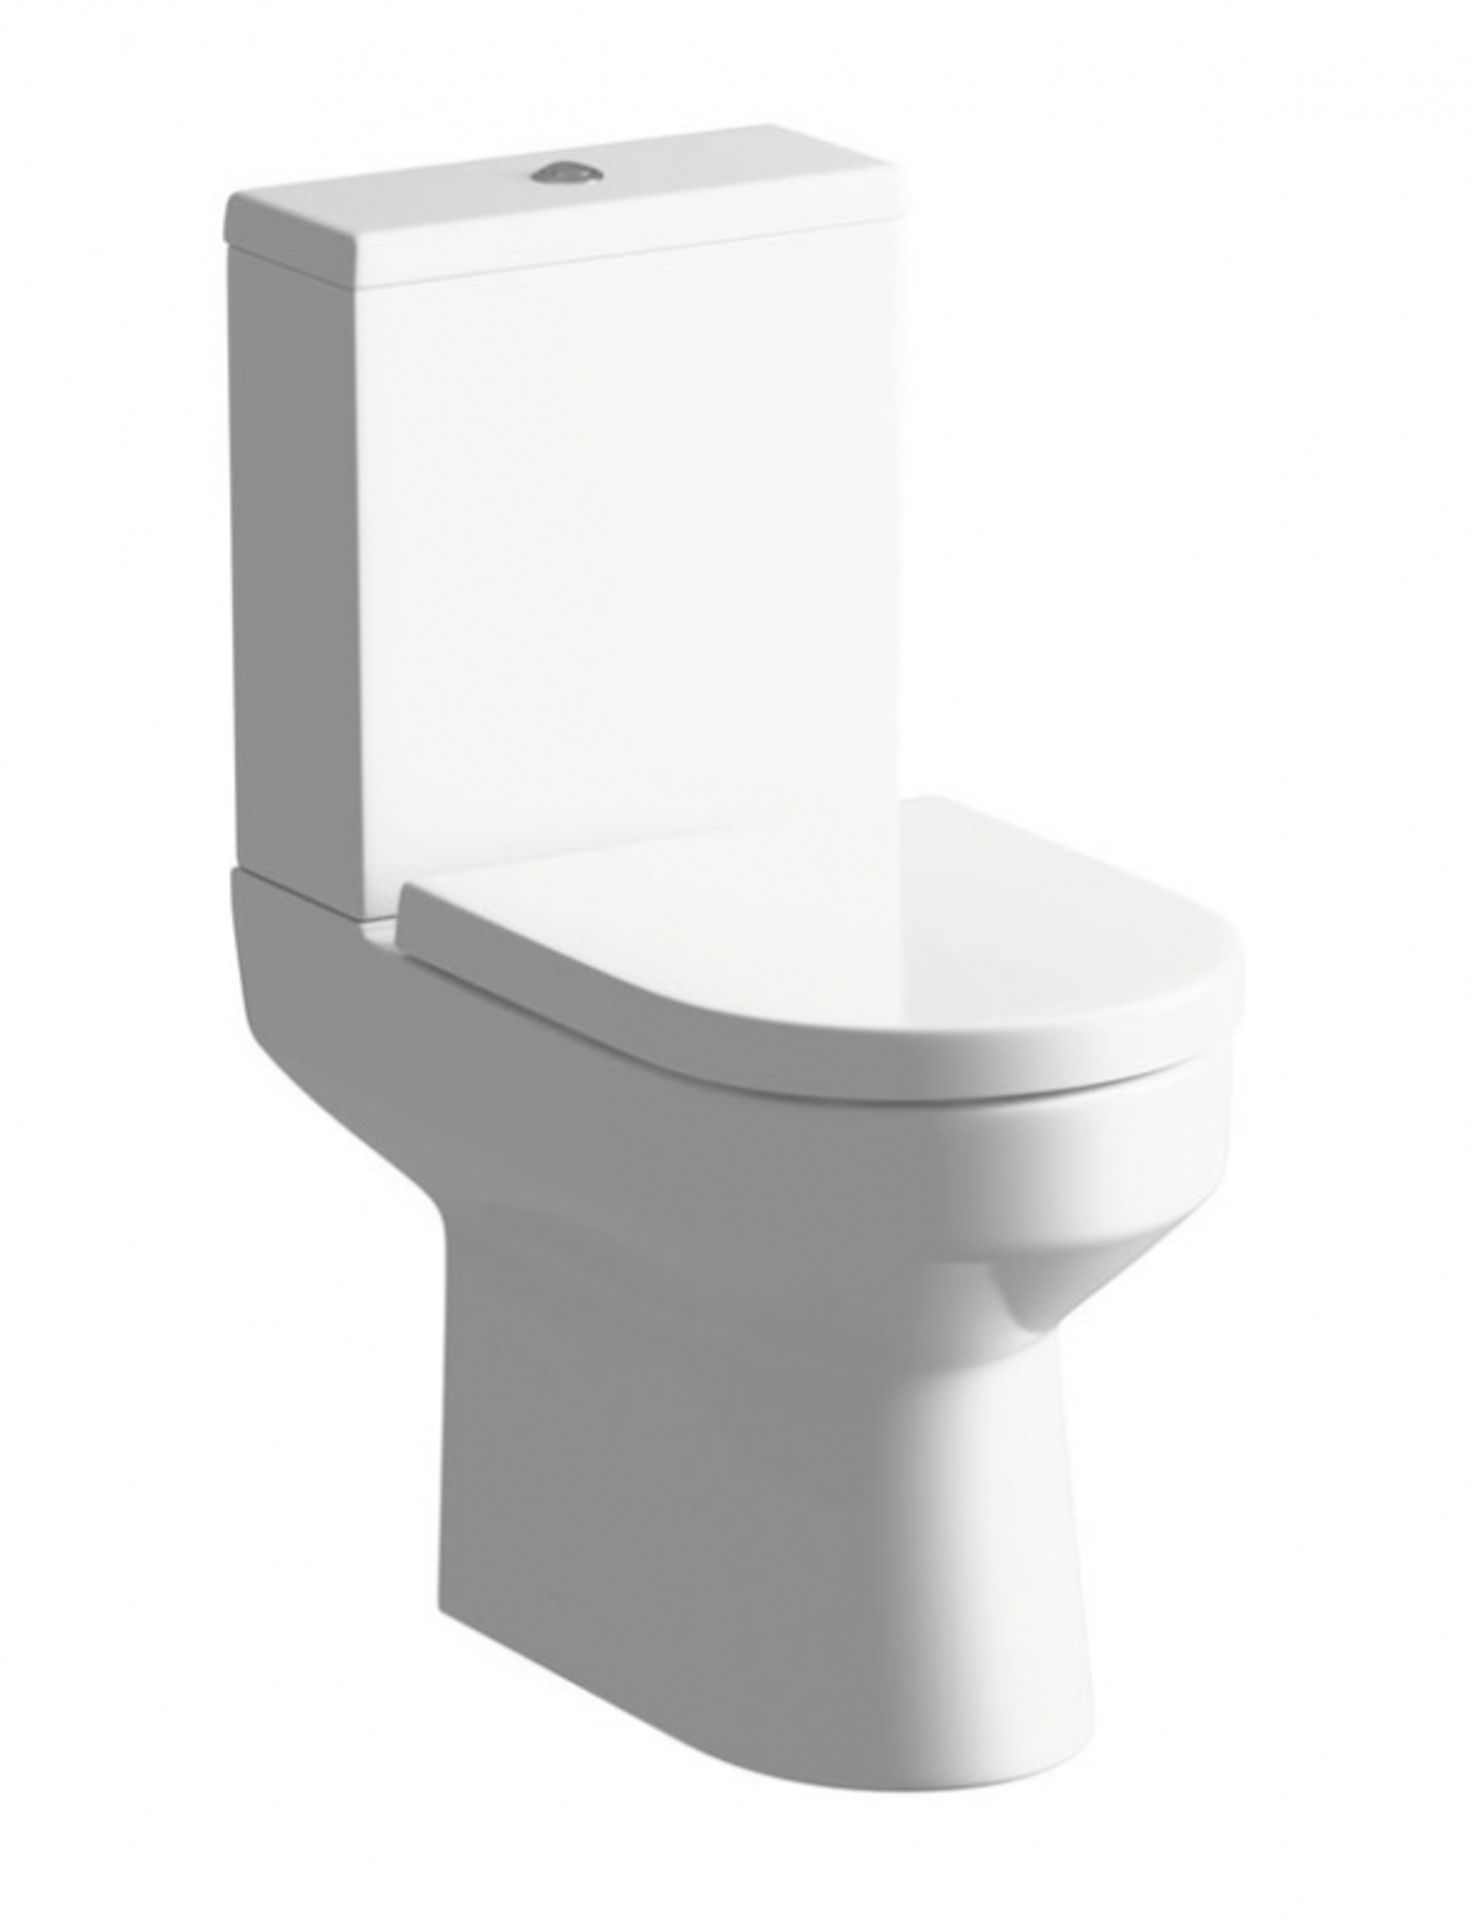 New & Boxed Lauruc Close Coupled Wc Inc Soft Close Toilet Seat. Rrp £495.00. Close Coupled Wc ... - Image 2 of 2